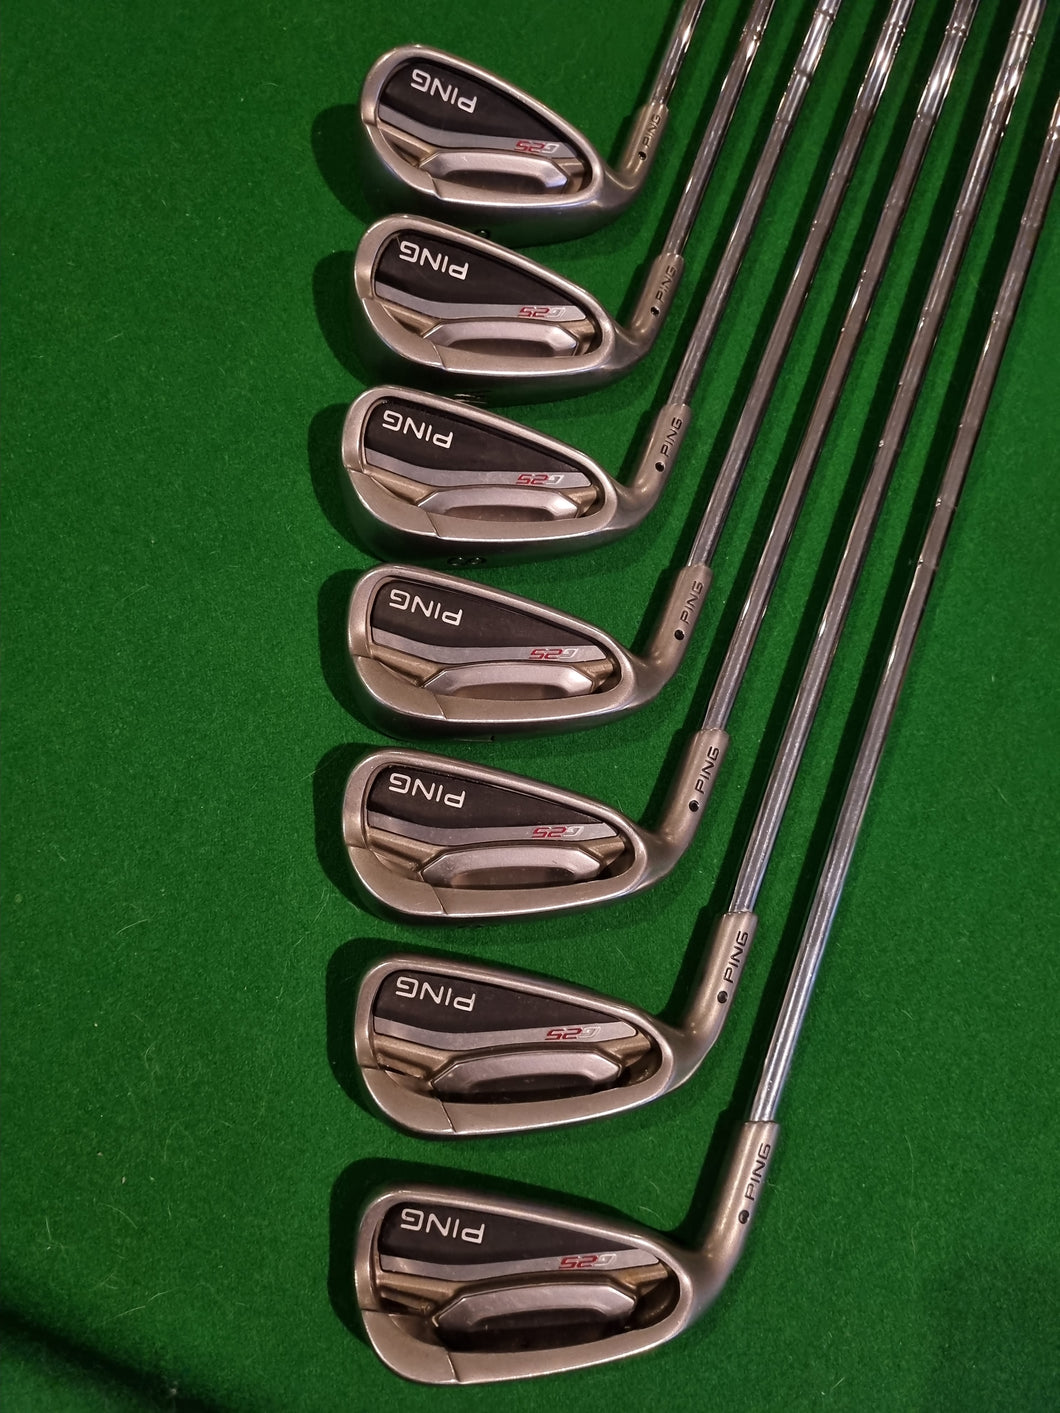 Ping G25 Irons LH 4 - SW (no 9 iron)